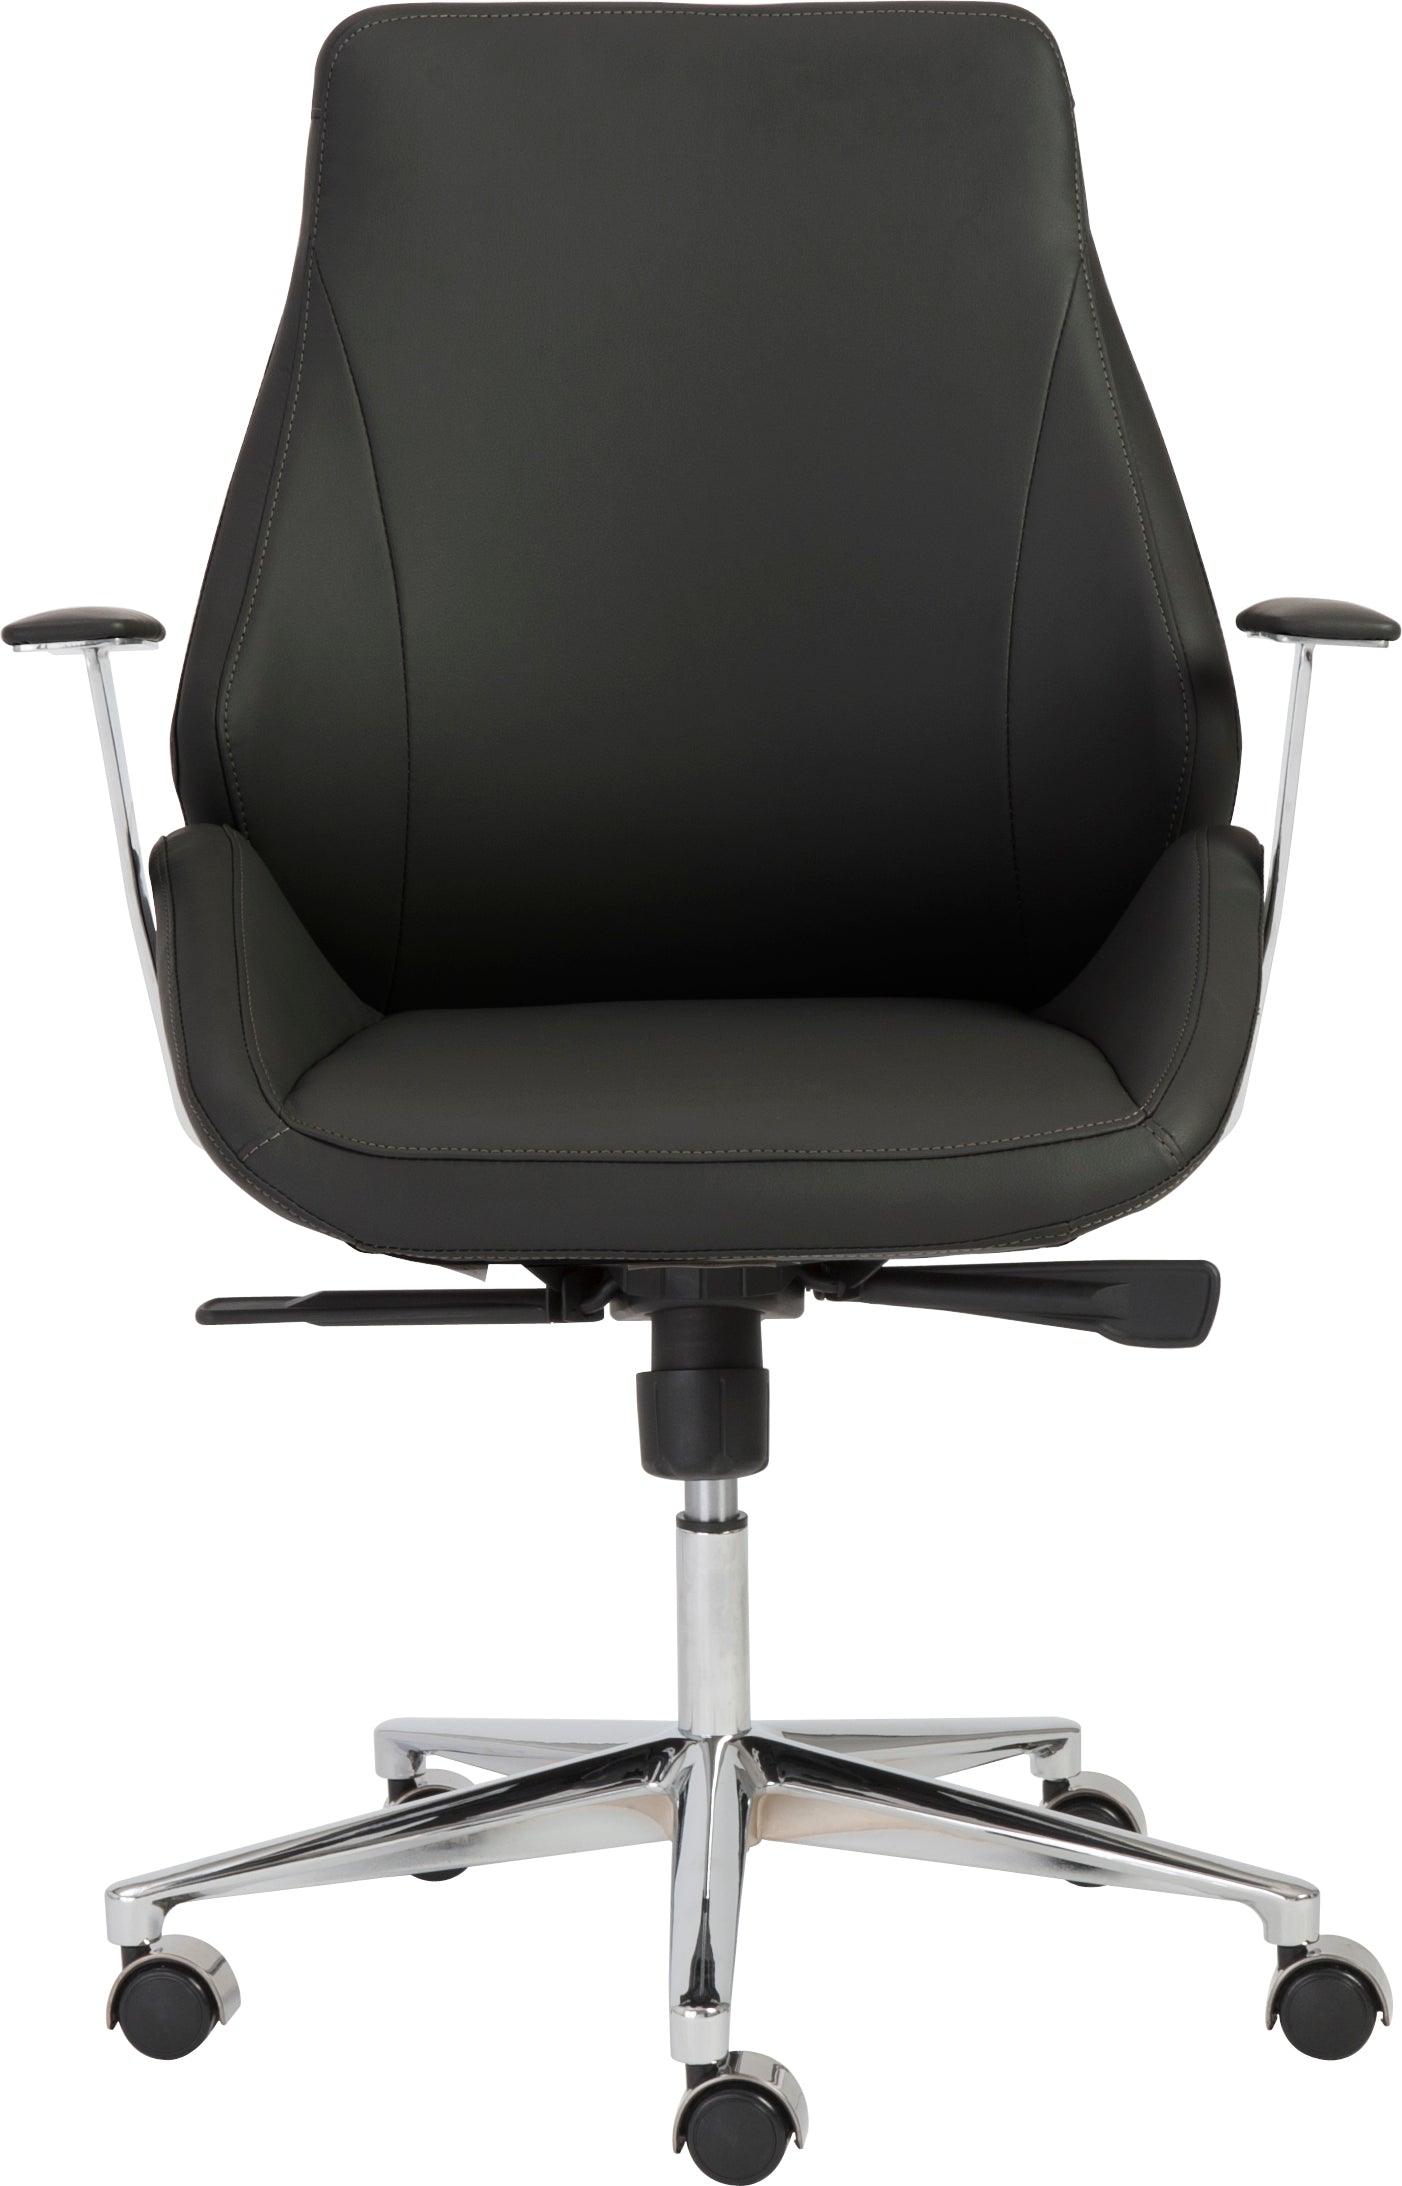 Euro Style Task Chairs - Bergen Low Back Office Chair Black